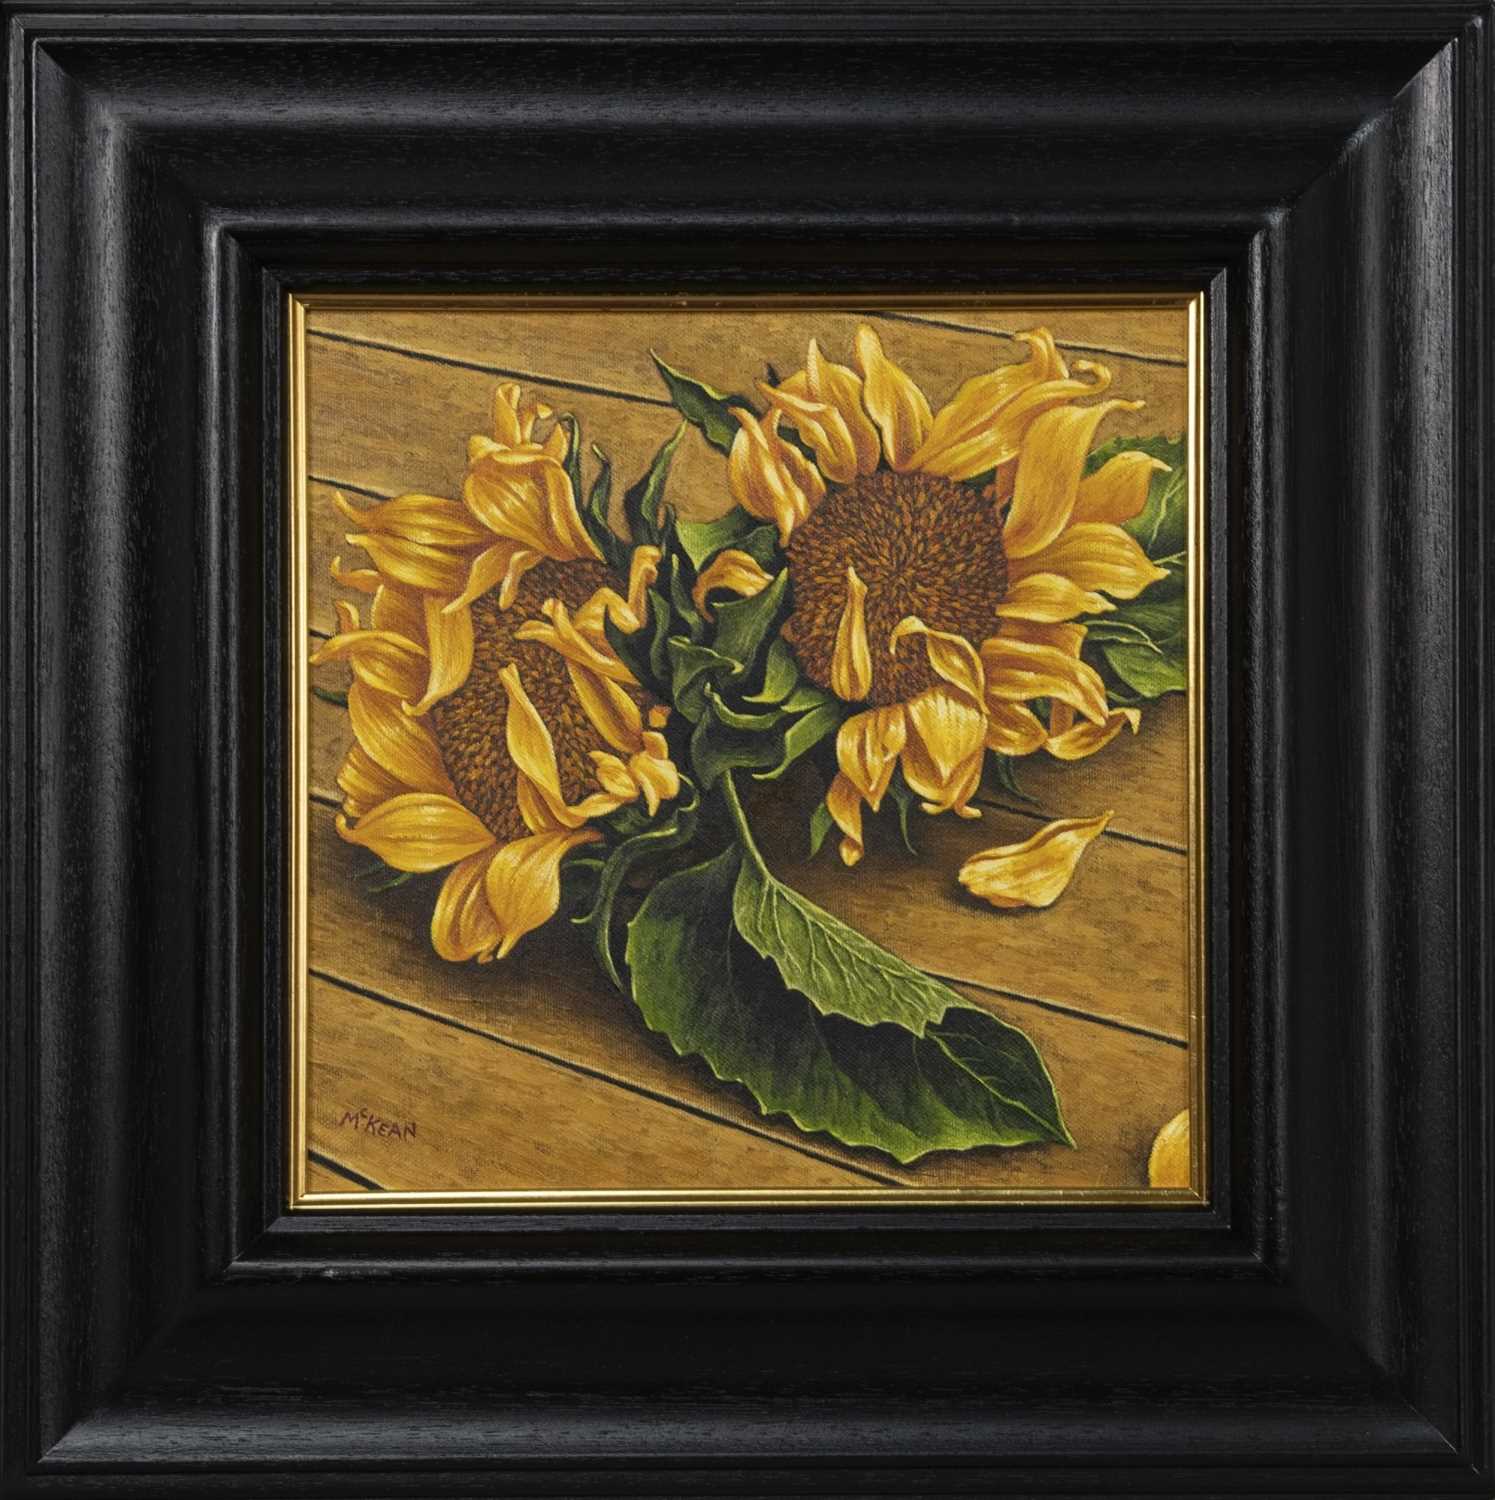 Lot 153 - SUNFLOWERS ON A WOODEN TABLE, AN OIL BY GRAHAM MCKEAN